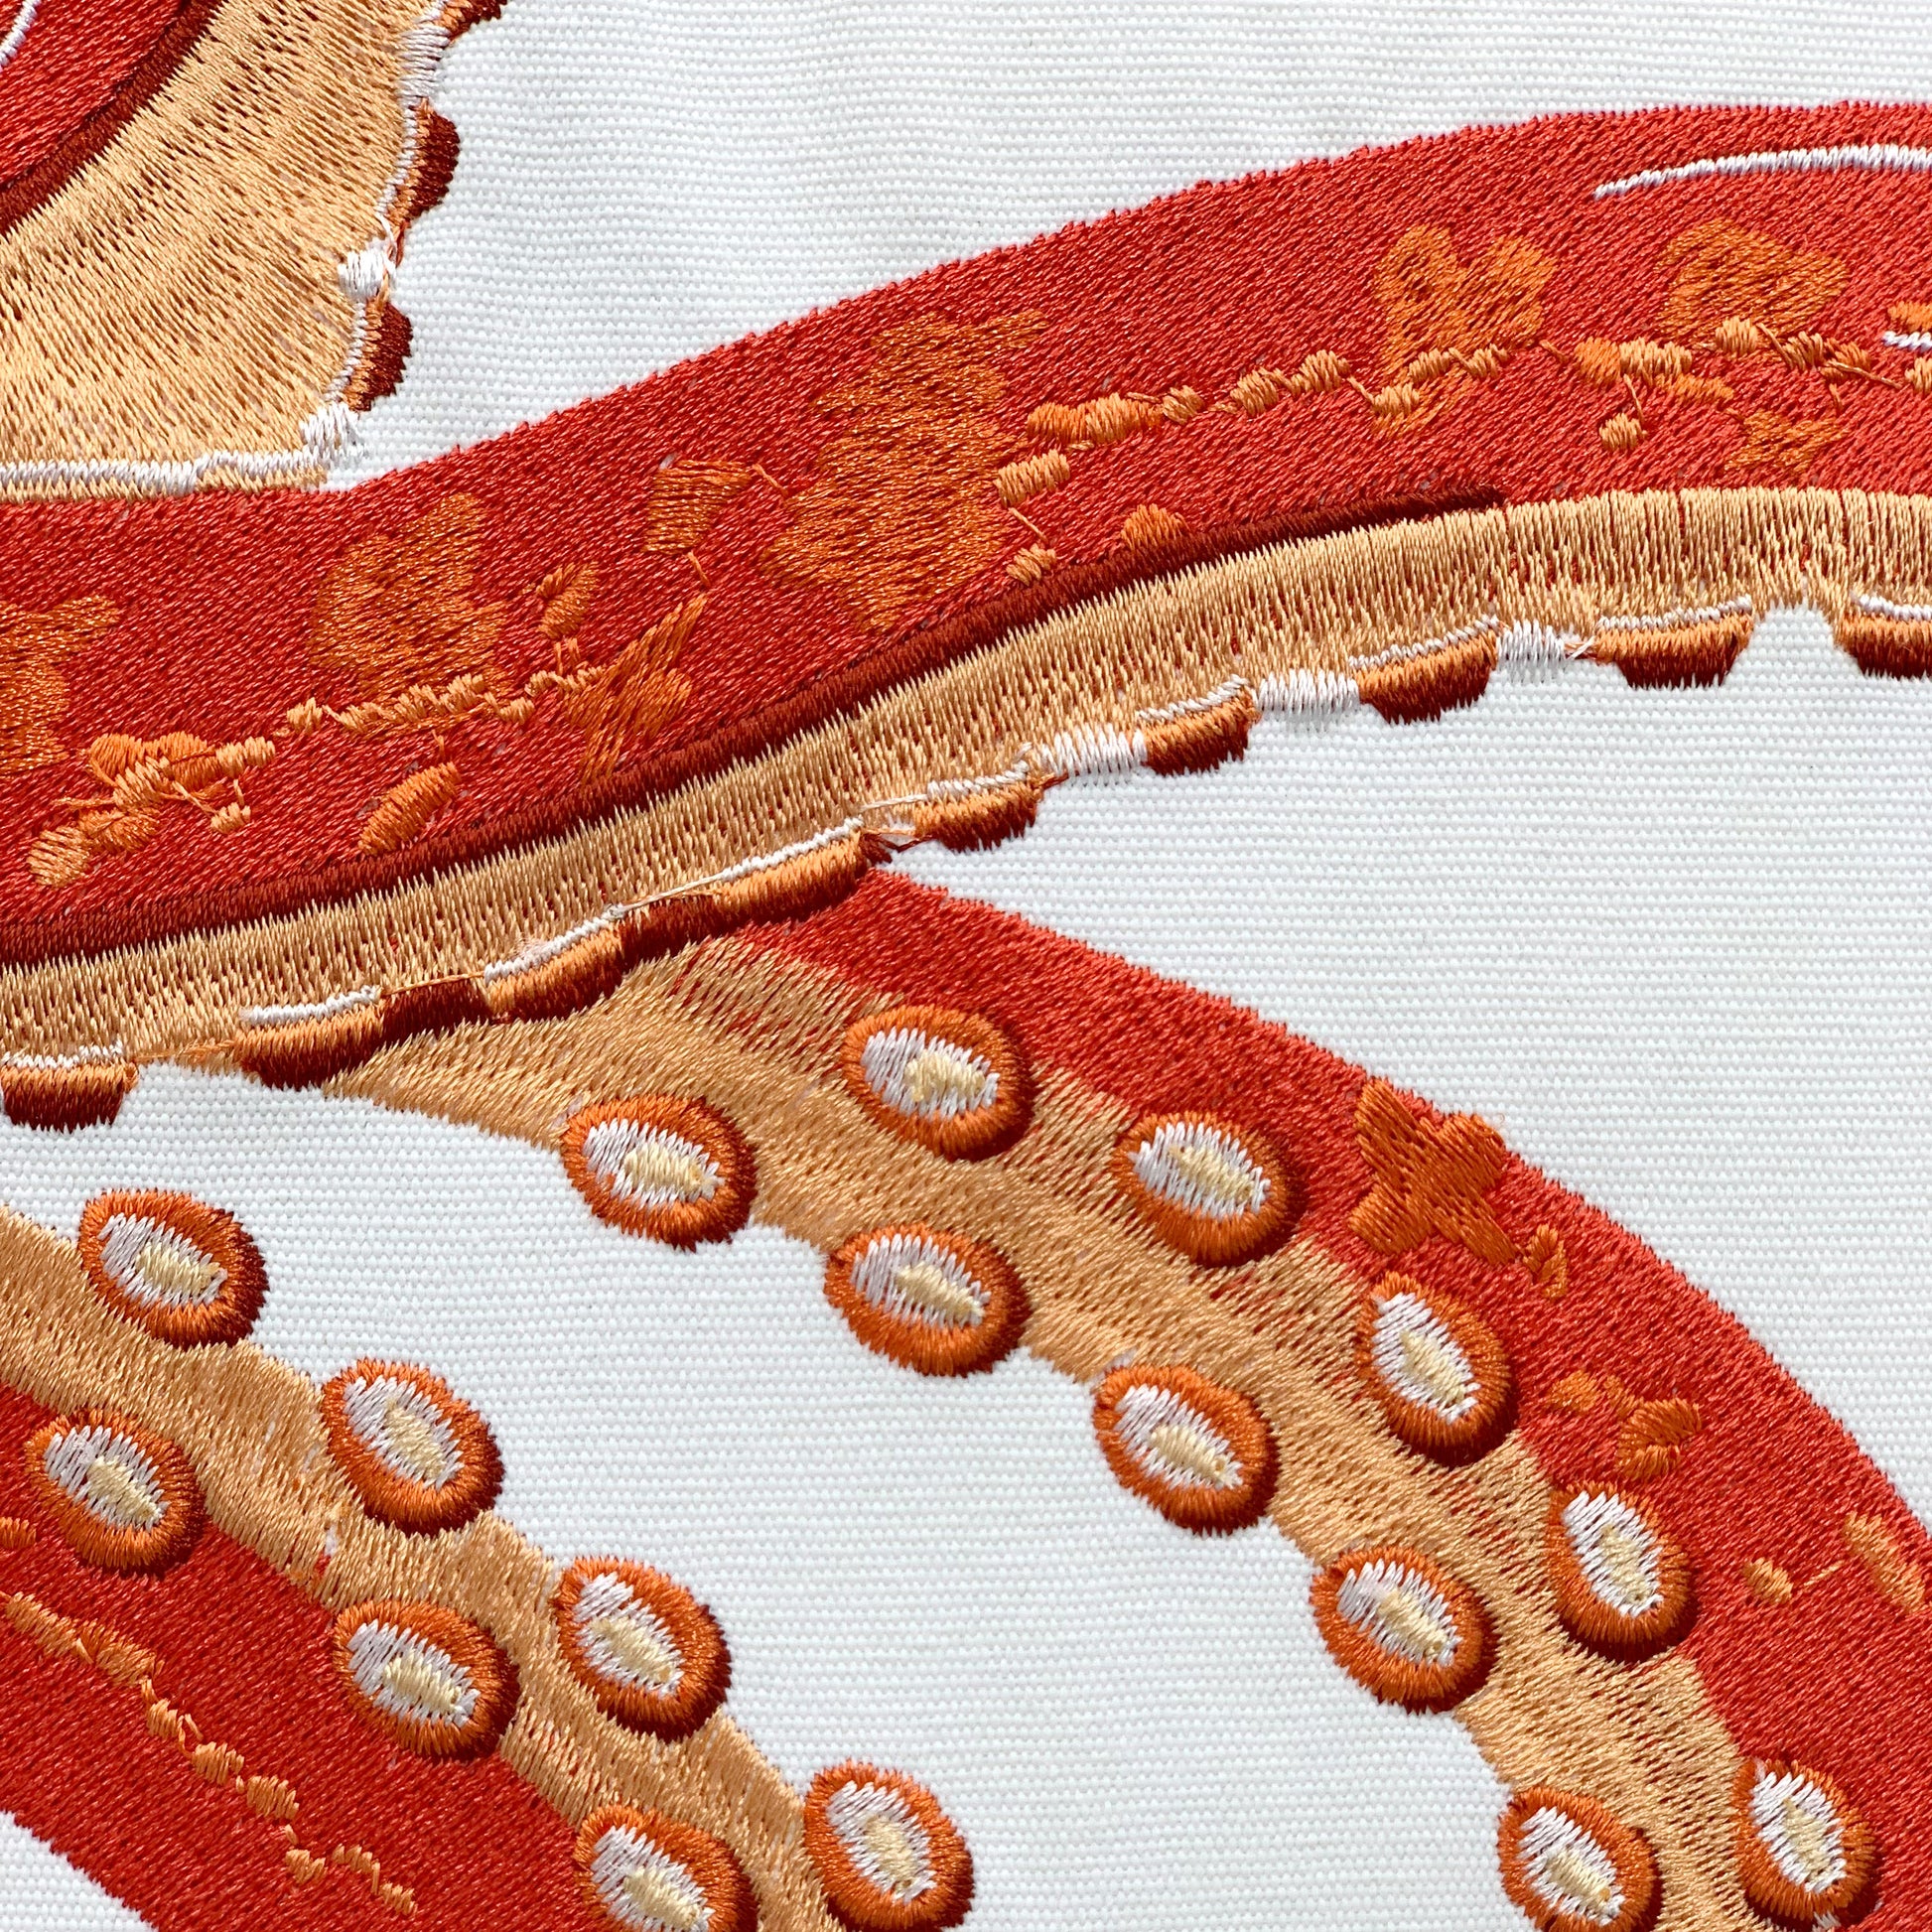 Detail shot of the Tropical Punch Coral Octopus pillow's embroidery work.